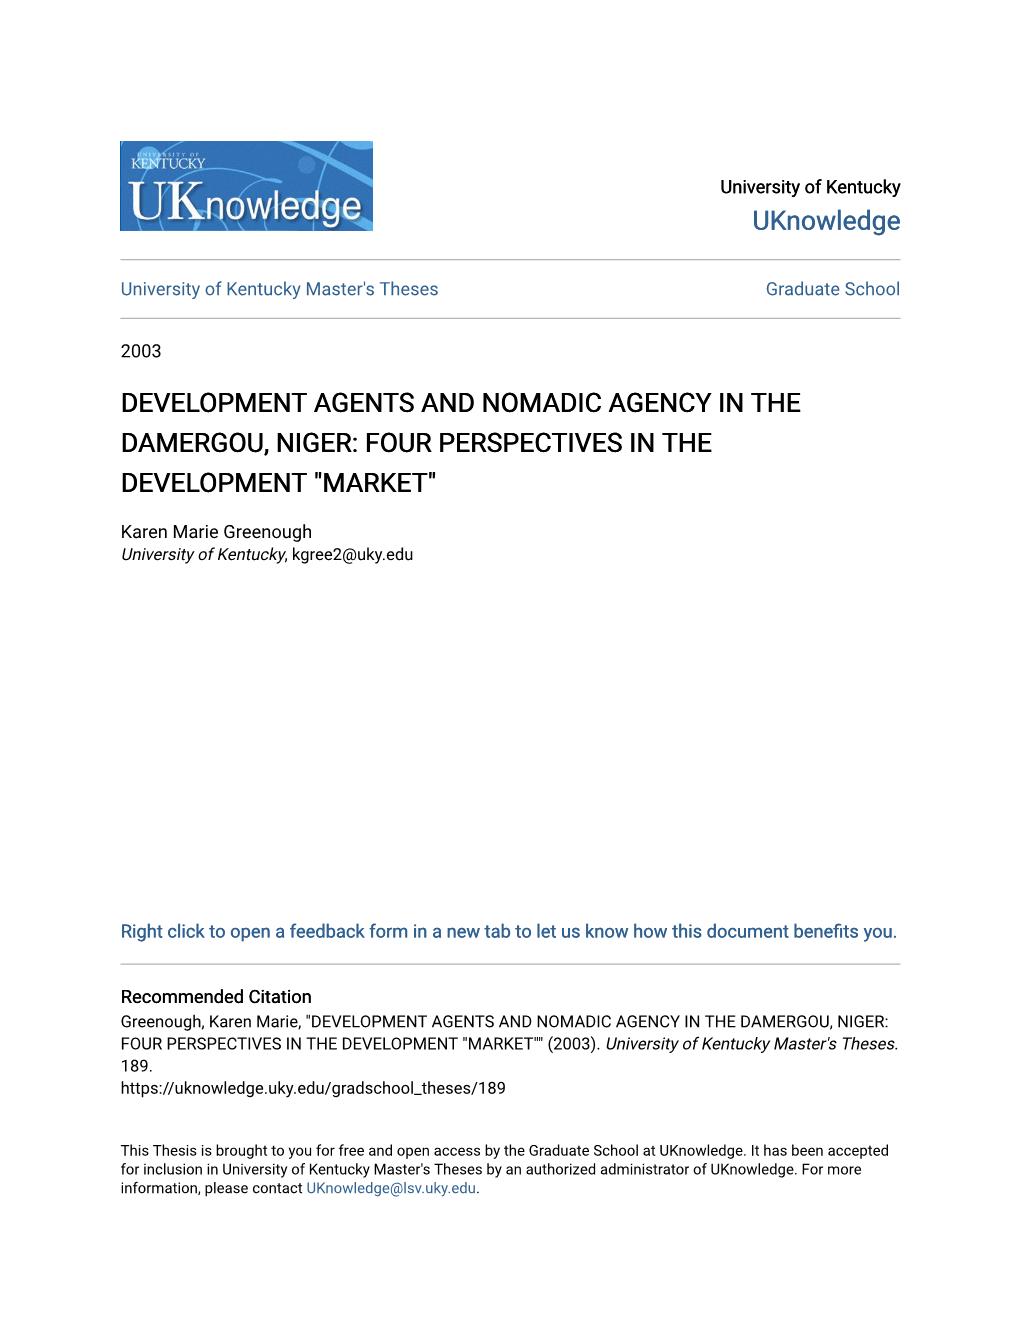 Development Agents and Nomadic Agency in the Damergou, Niger: Four Perspectives in the Development "Market"